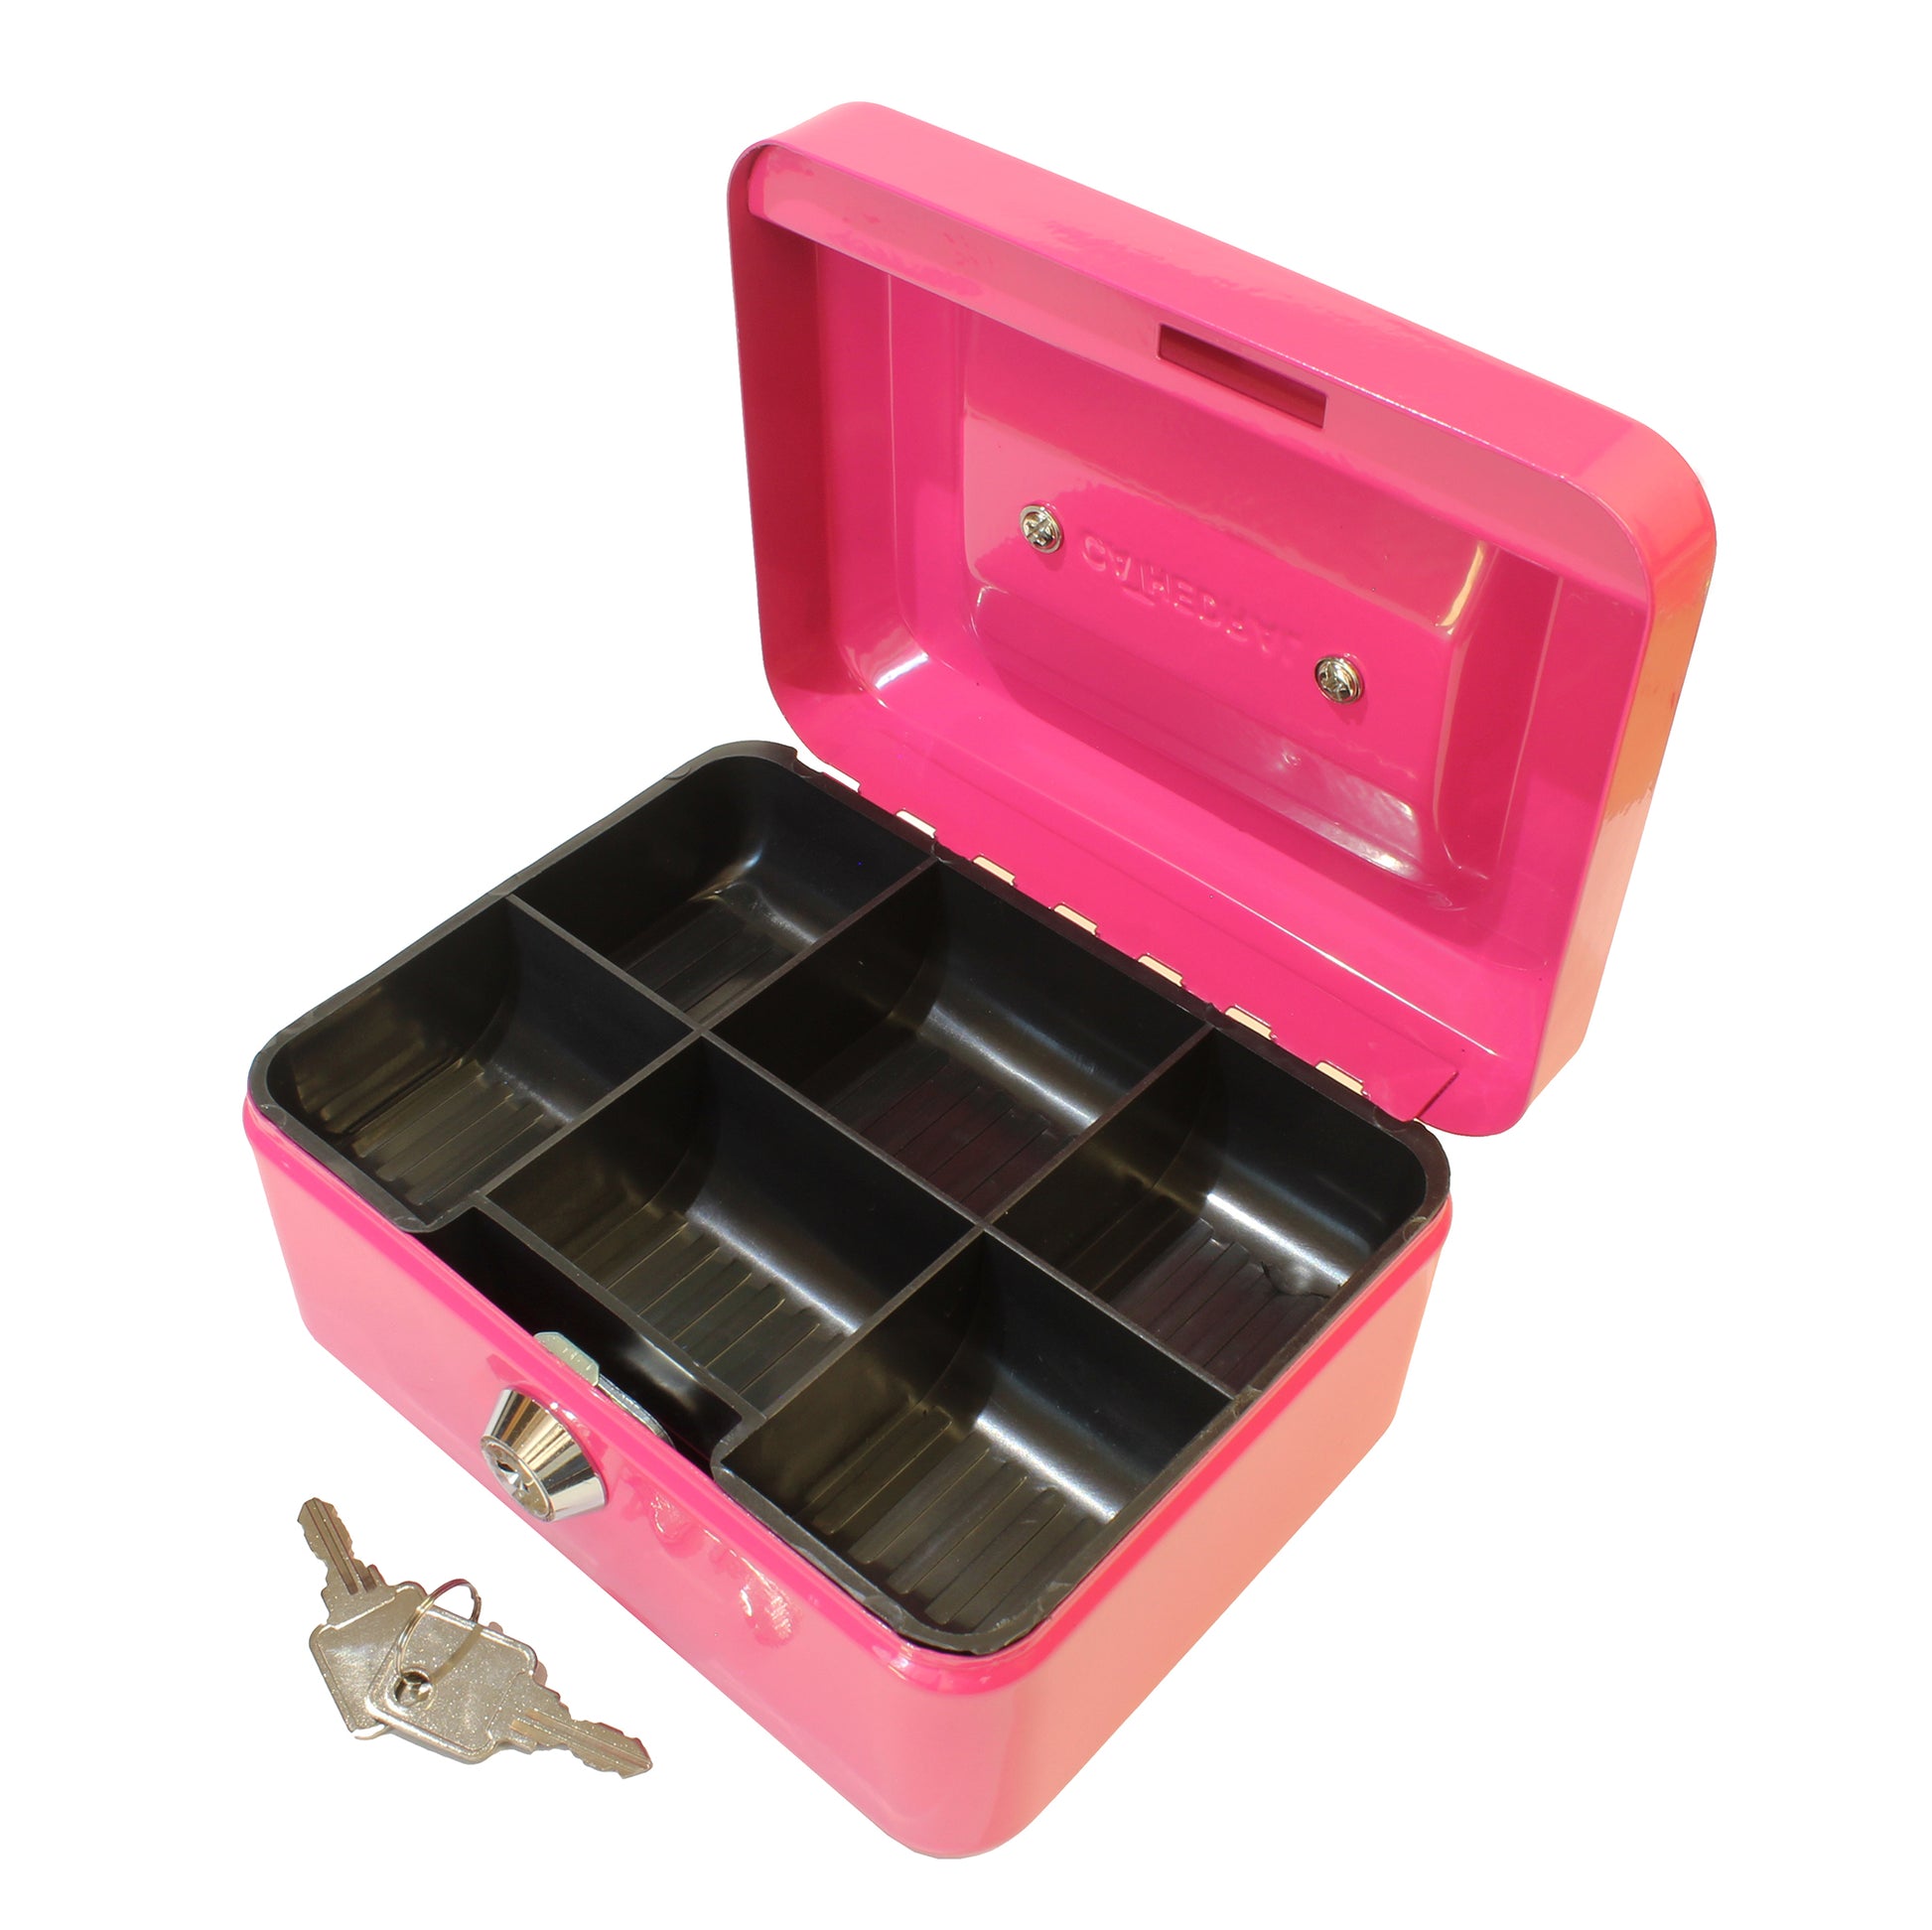 An open 6-inch key lockable bright pink cash box with a lift-out black 6-compartment tray, designed for organizing and securing coins and cash. A set of 2 keys on a ring is shown in front of the cash box.